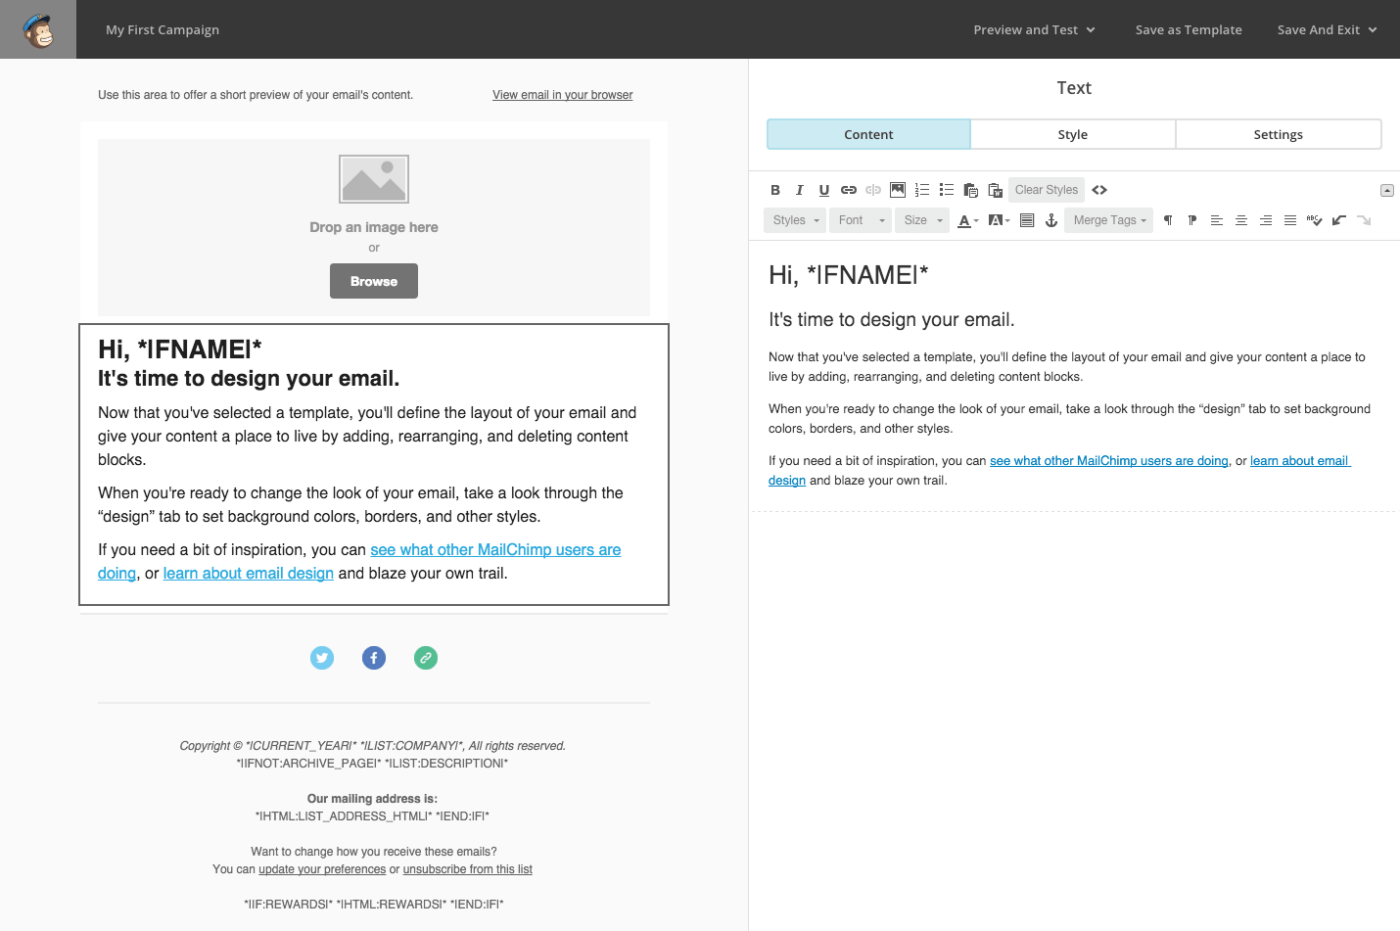 Mailchimp offering complex tools for automating email communications